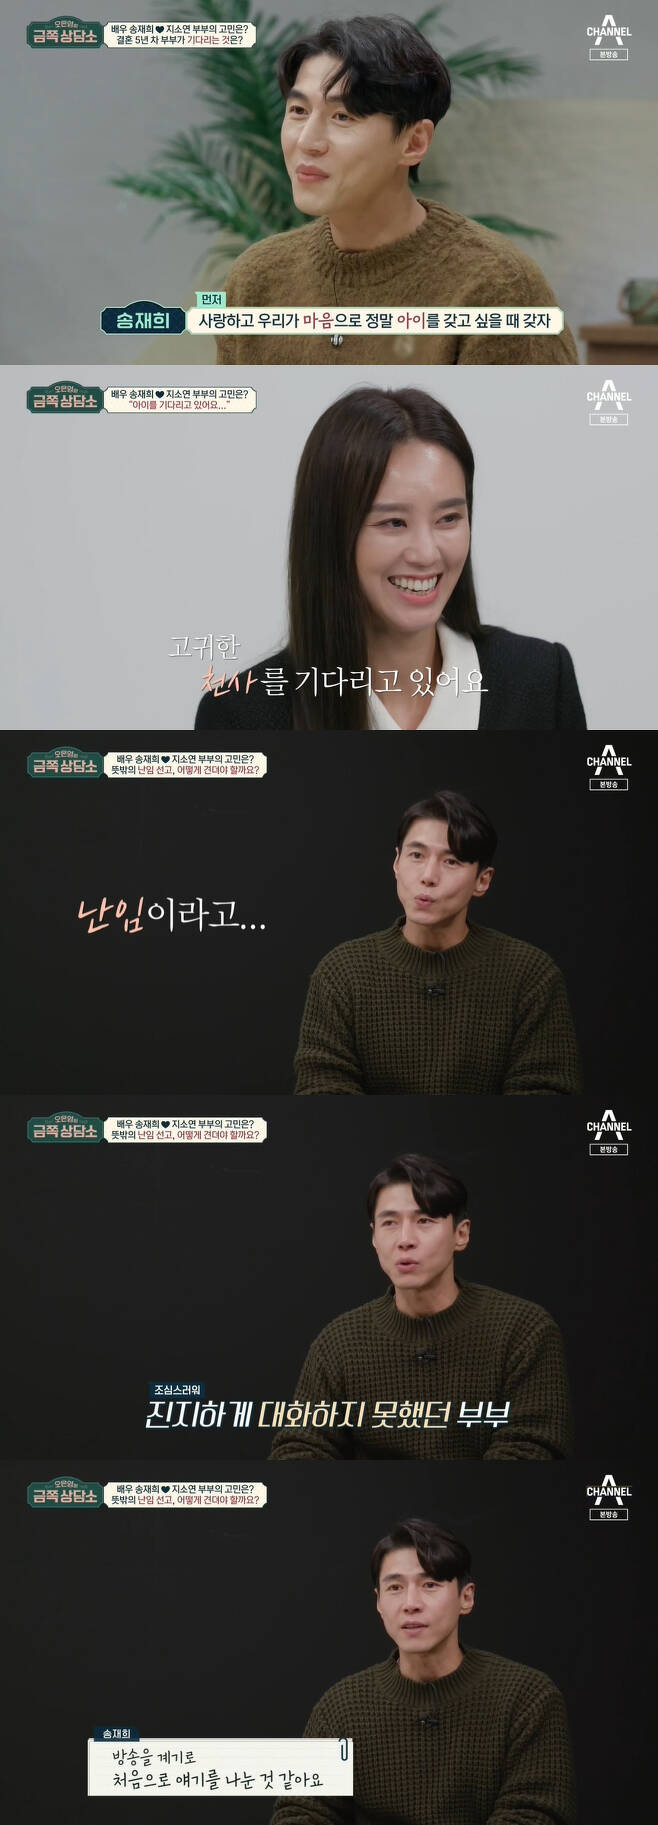 Song Jae-hee and Ji So-yun have been judged Im game, Confessions have said.Channel A Oh Eun-youngs Gold Counseling Center (hereinafter referred to as Gold Counseling Center), which aired on the 31st, featured Sun-Nam actress Song Jae-hee and Ji So-yun.When asked about the second generation plan, Ji So-yun said, I am waiting for a noble angel that I can not do with my efforts.Song Jae-hee also said he was waiting for a child that may not be our power.Song Jae-hee said, I heard the story of Im game in the hospital.I learned that I had to have a child through the test tube. It seems that I saw my wife panic for the first time with marriage.In fact, I have only been facing my wife for a few days. I think I talked for the first time because I decided to come to this broadcast.